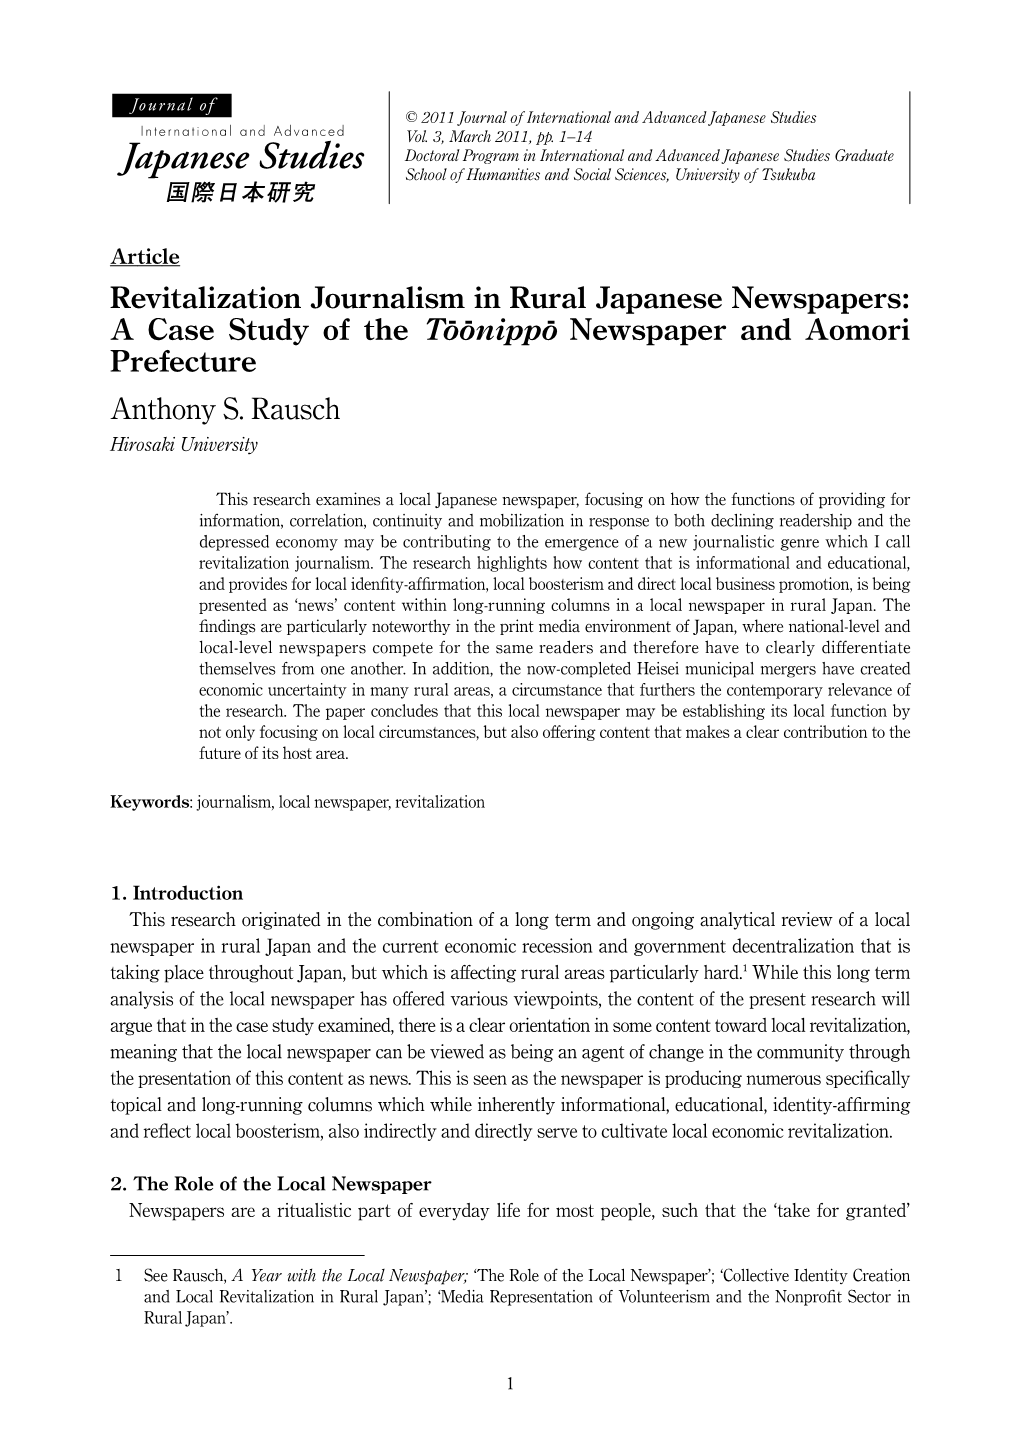 Revitalization Journalism in Rural Japanese Newspapers: a Case Study of the T-O-Onipp-O Newspaper and Aomori Prefecture Anthony